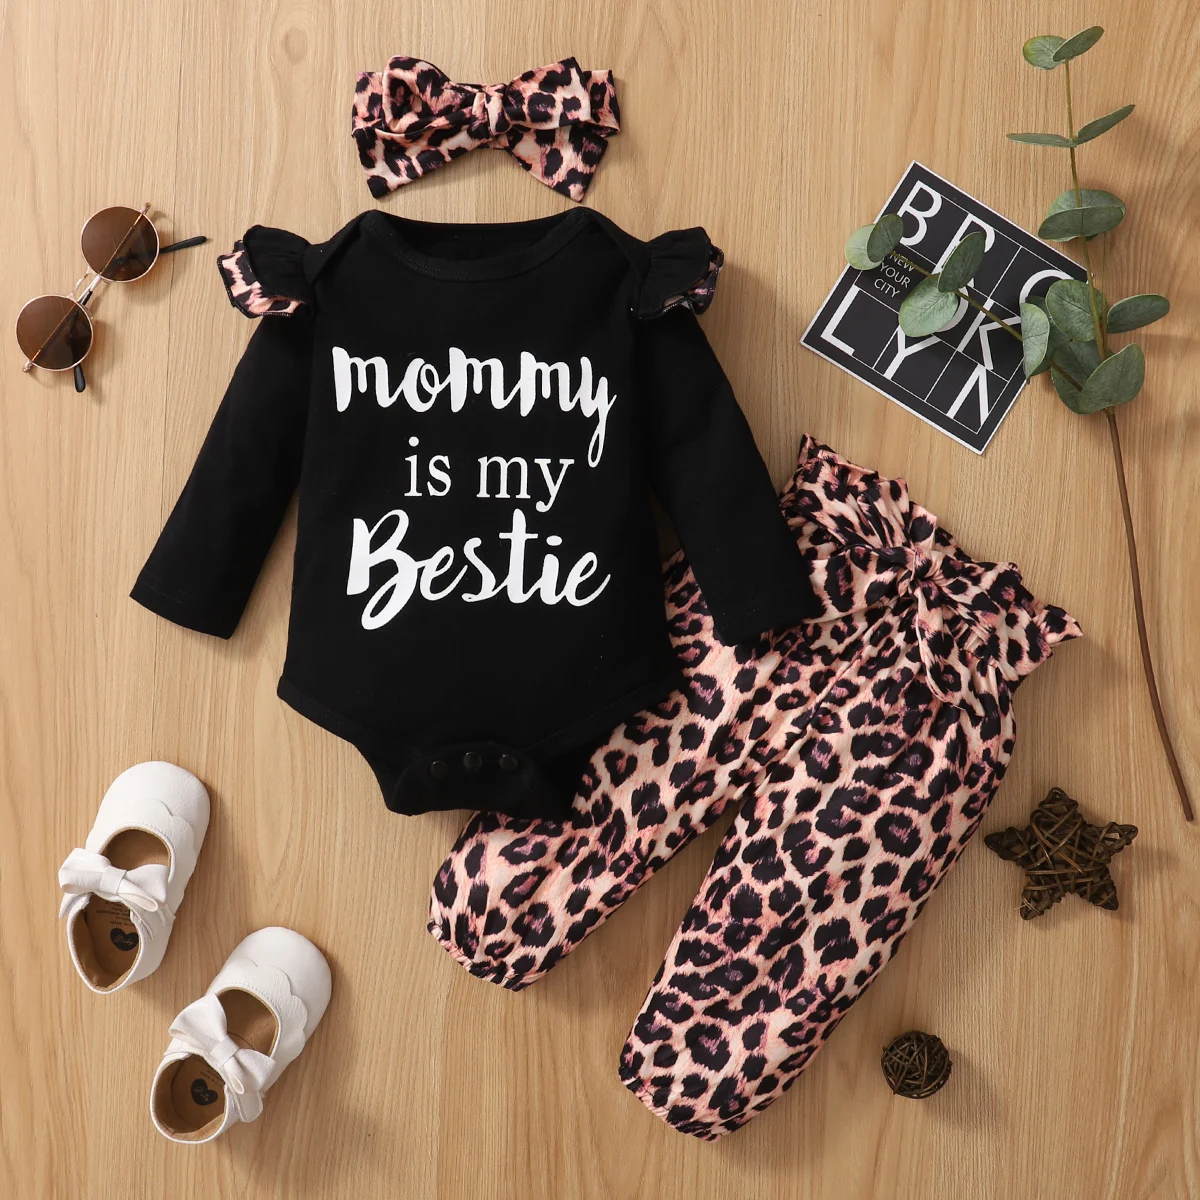 vintage Baby Clothing Set Newborn Infant Baby Girls Clothes Sets Fashion Girls Letter Print Leopard Print Romper Pants Headband 3PCS Outfit Girls Clothing baby dress set for girl